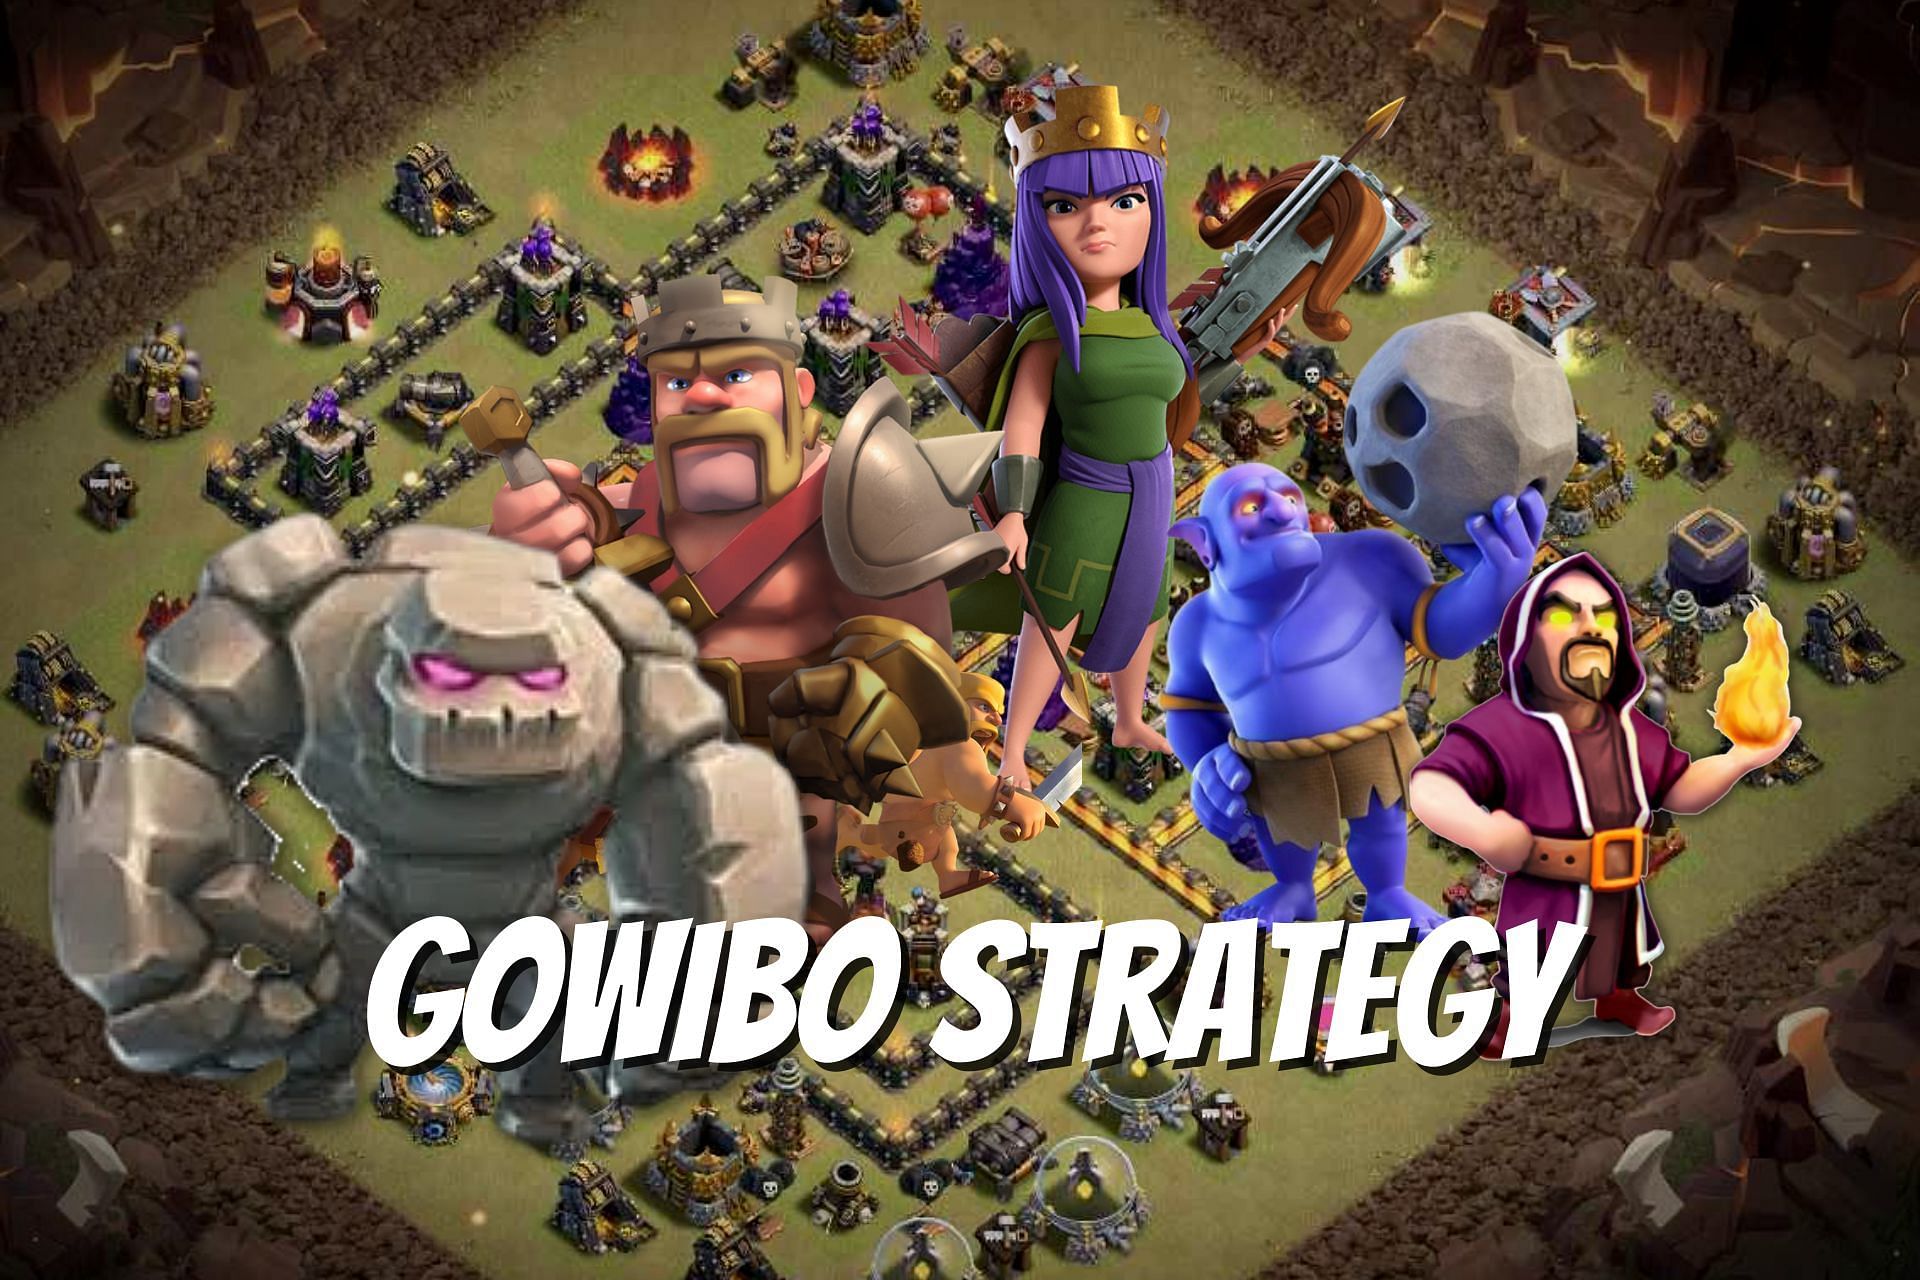 The GOWIBO attack strategy in Clash of Clans (Image via Sportskeeda)